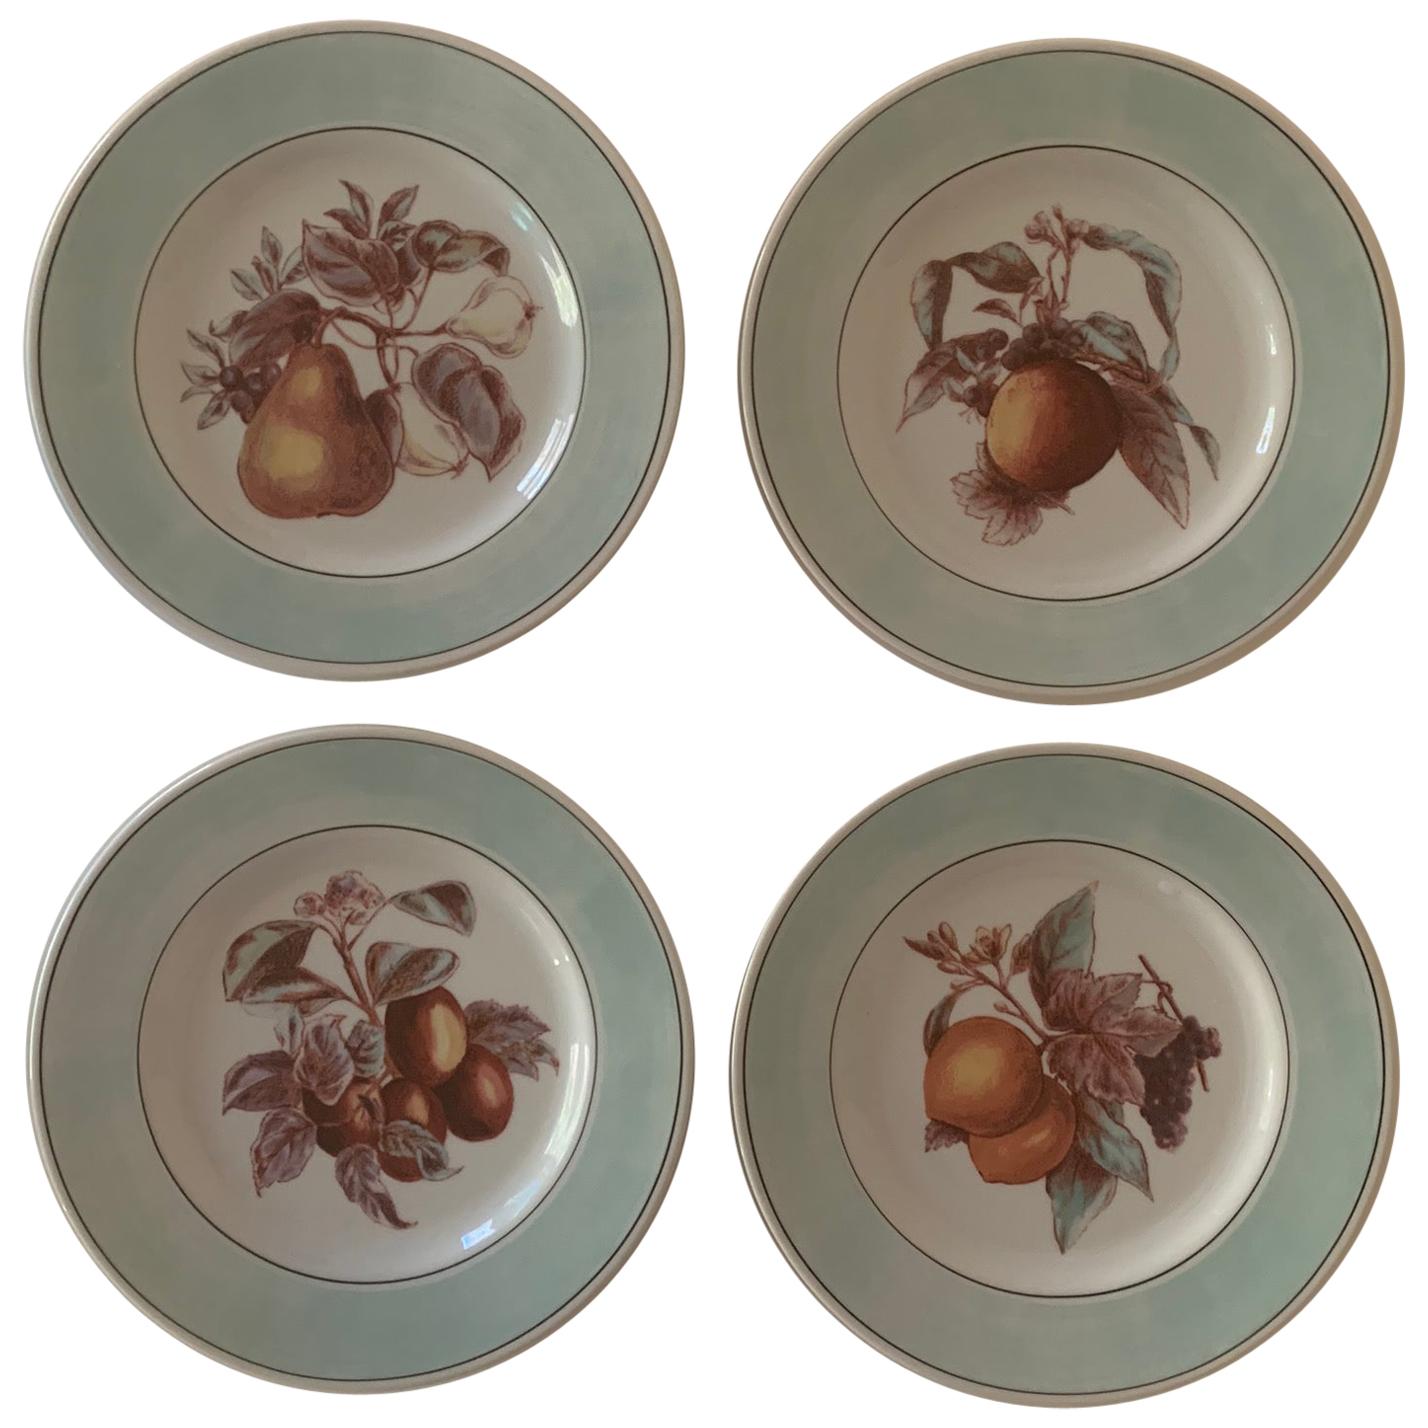 A set of four (4) dessert or salad plates by Lauren Home for Ralph Lauren in the Fruit Blossom pattern. Signed. Two dishes retain original tag.

Features four different variations of florals; numbered I, II, III and IV.

Each dish measures 8